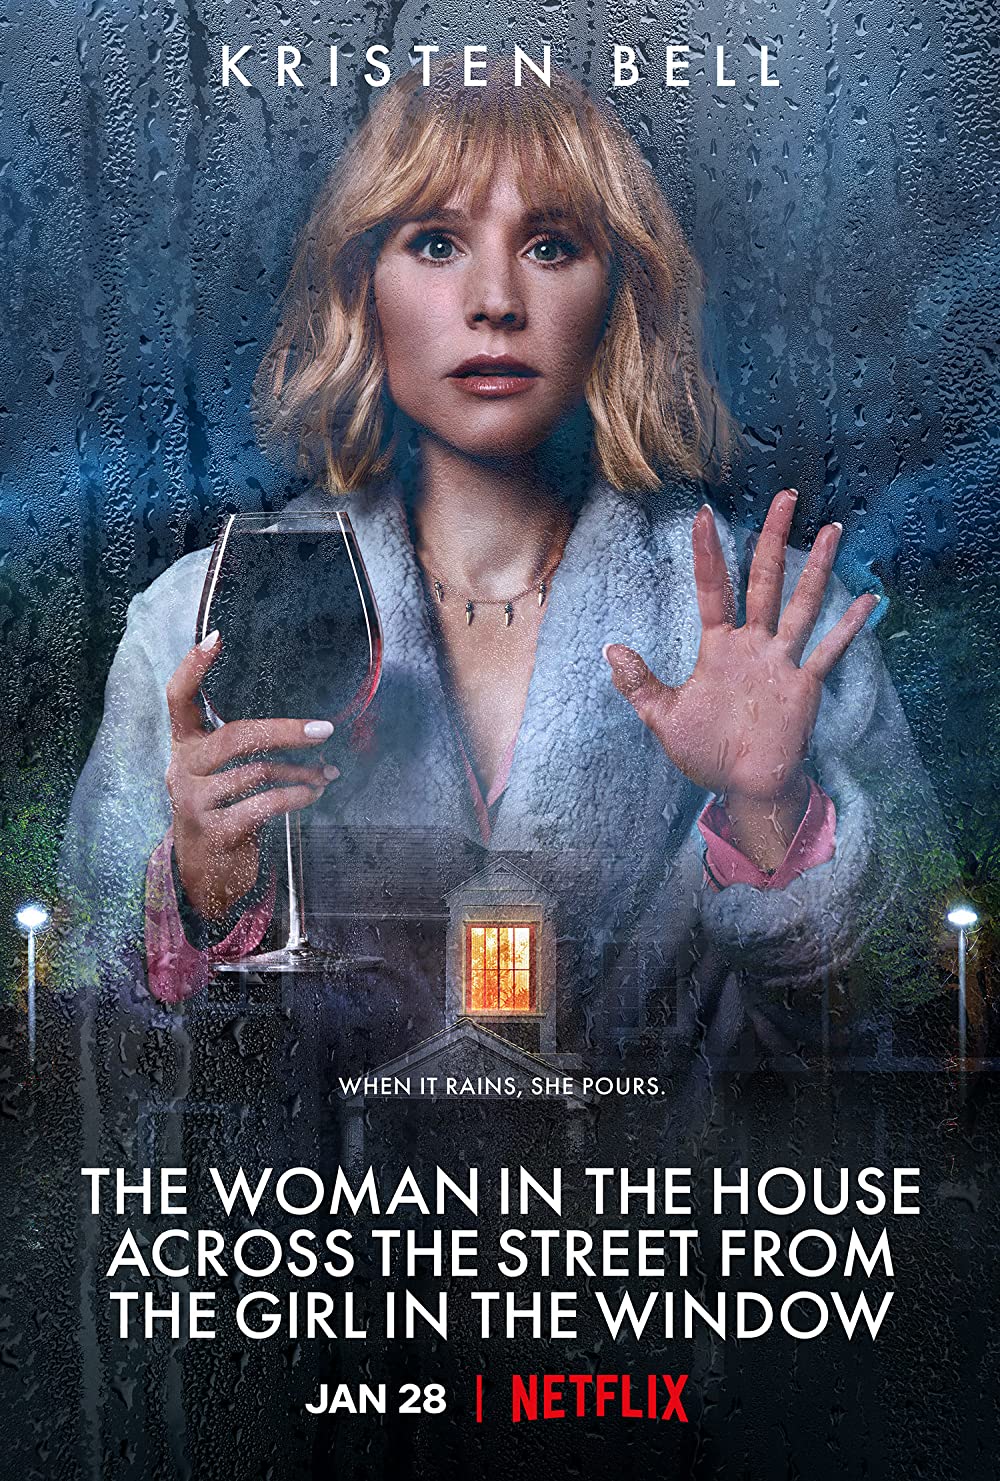 Filmbeschreibung zu The Woman in the House Across the Street from the Girl in the Window